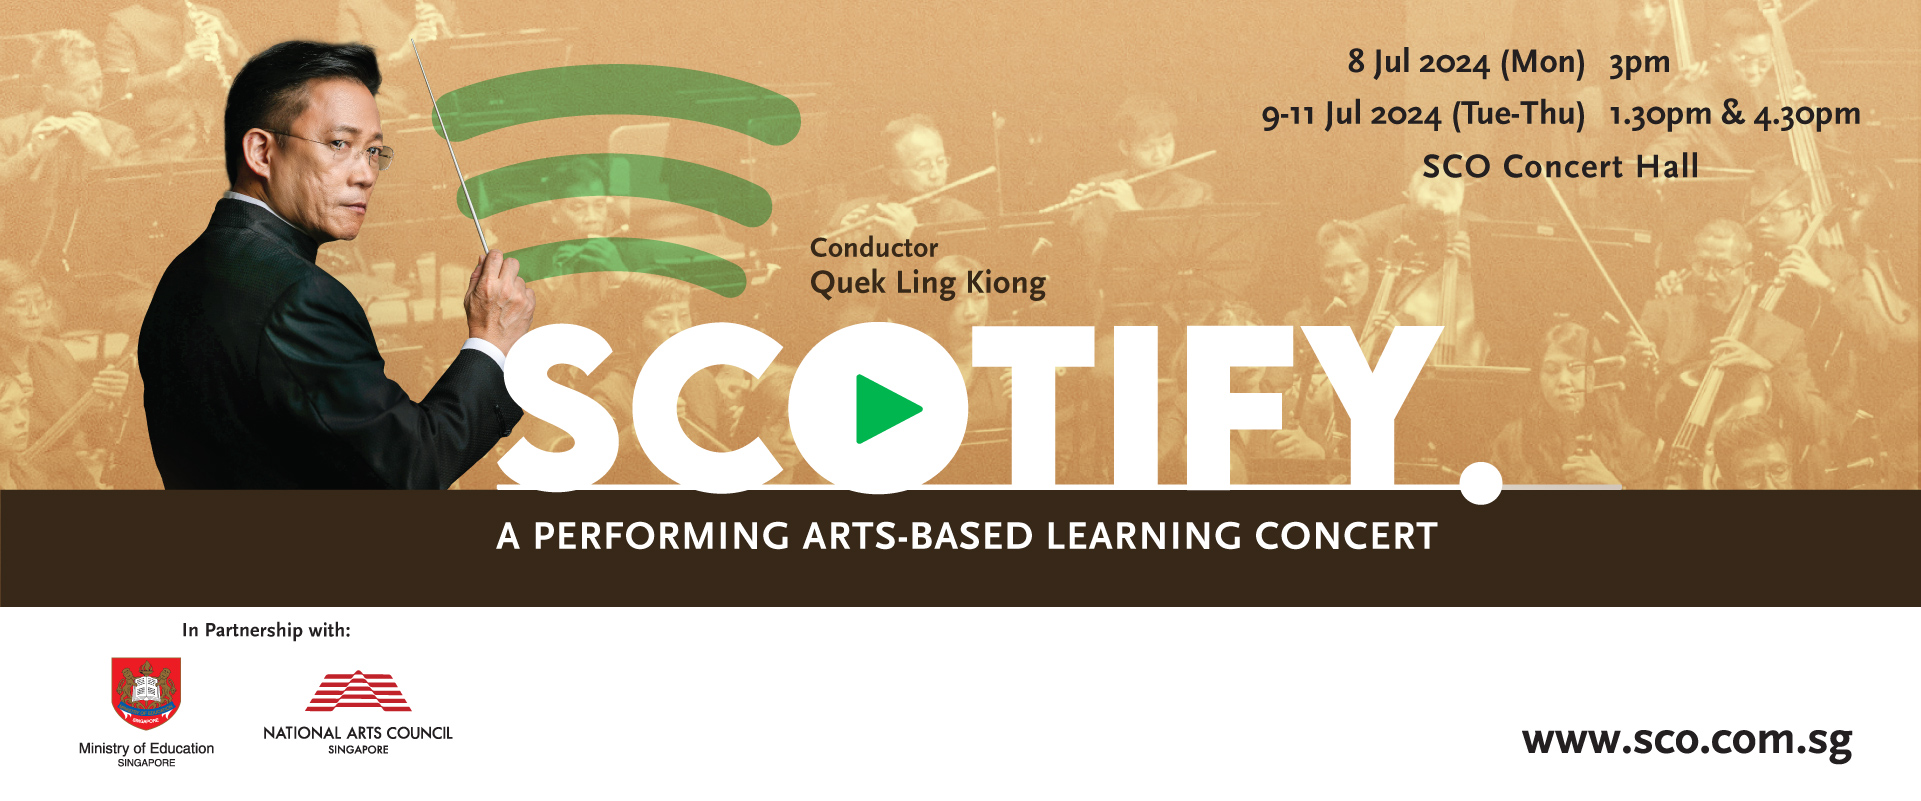 2024_SCOTIFY__Website_1920x800 SCOTIFY: A Performing Arts-Based Learning Concert 2024